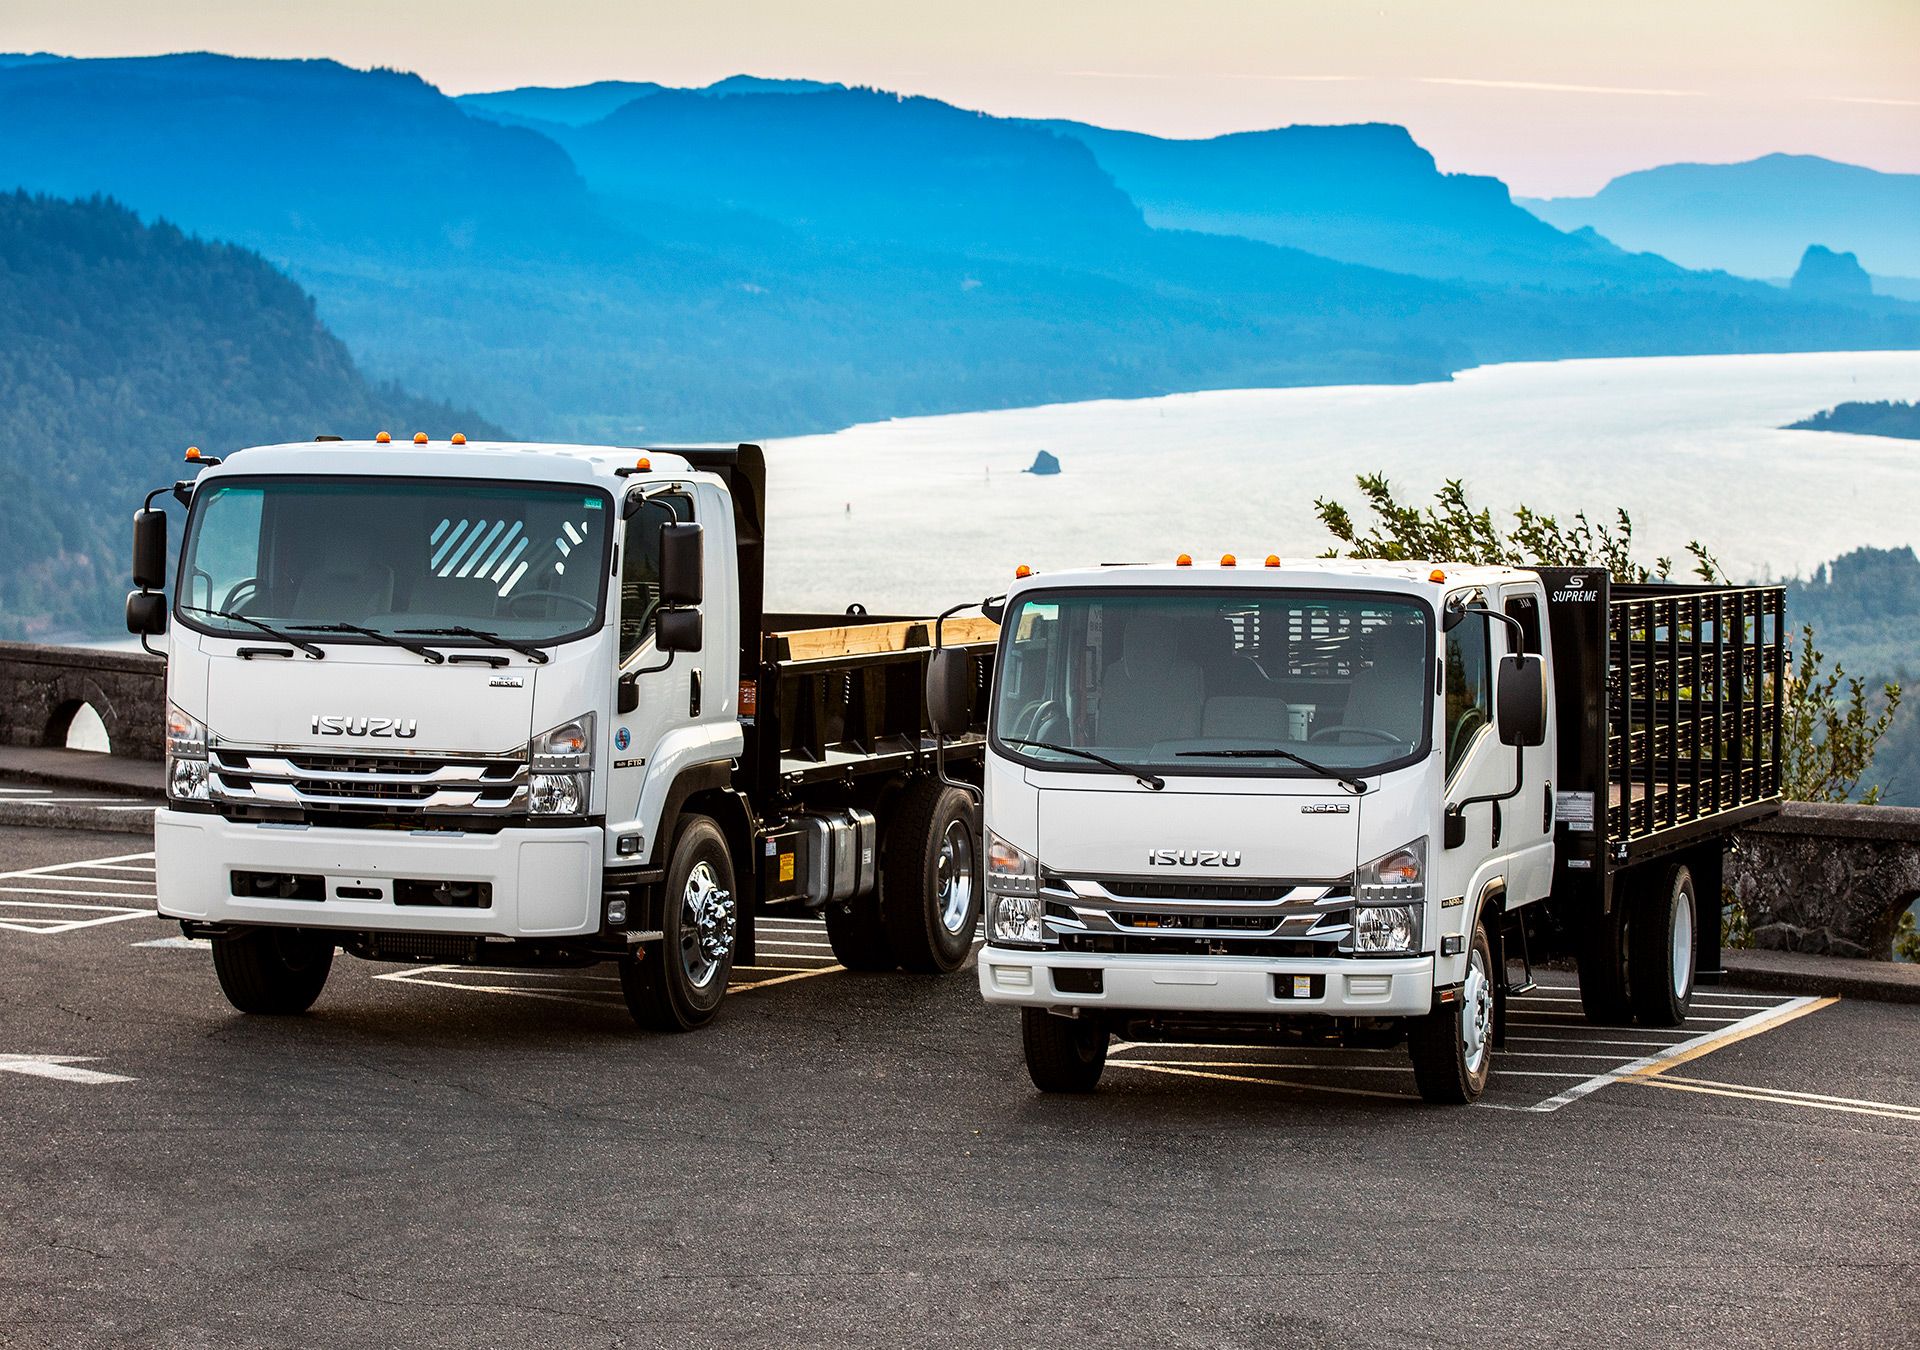 Two Isuzu Commercial Trucks parked with mountains and lake in background